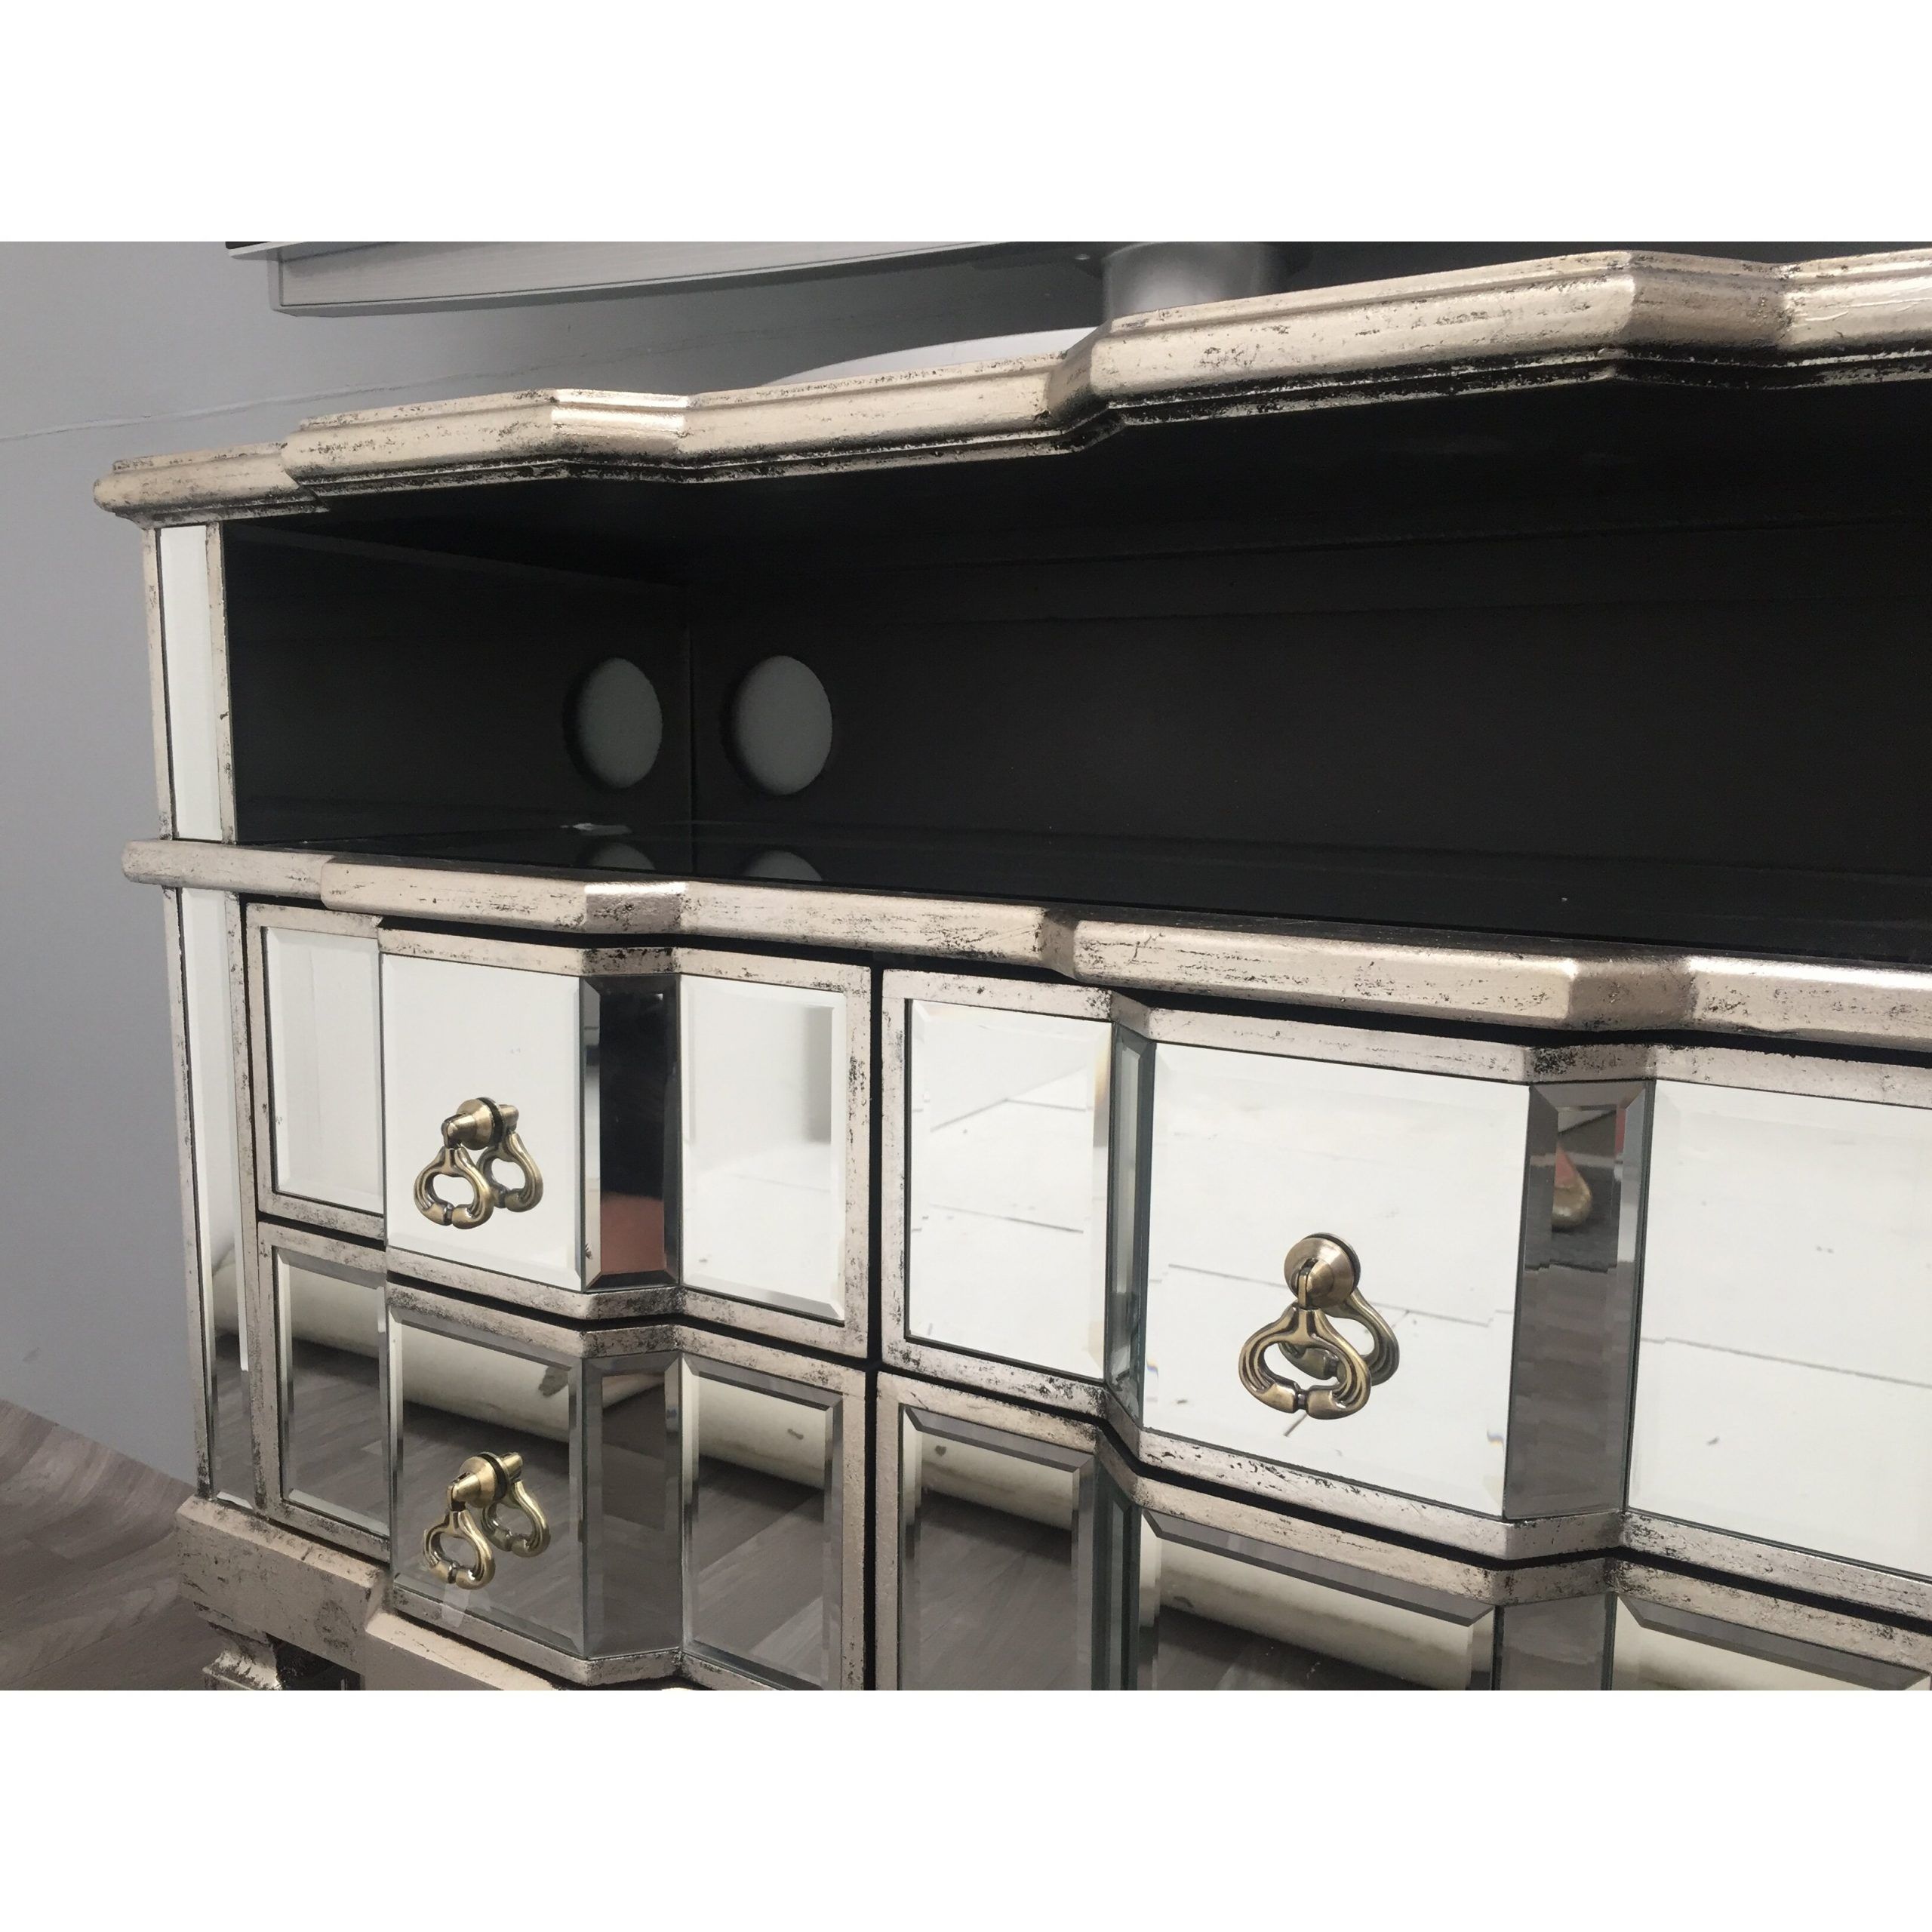 Alterton Vintage Mirrored Tv Cabinets & Reviews | Wayfair Throughout Mirrored Tv Cabinets (View 13 of 15)